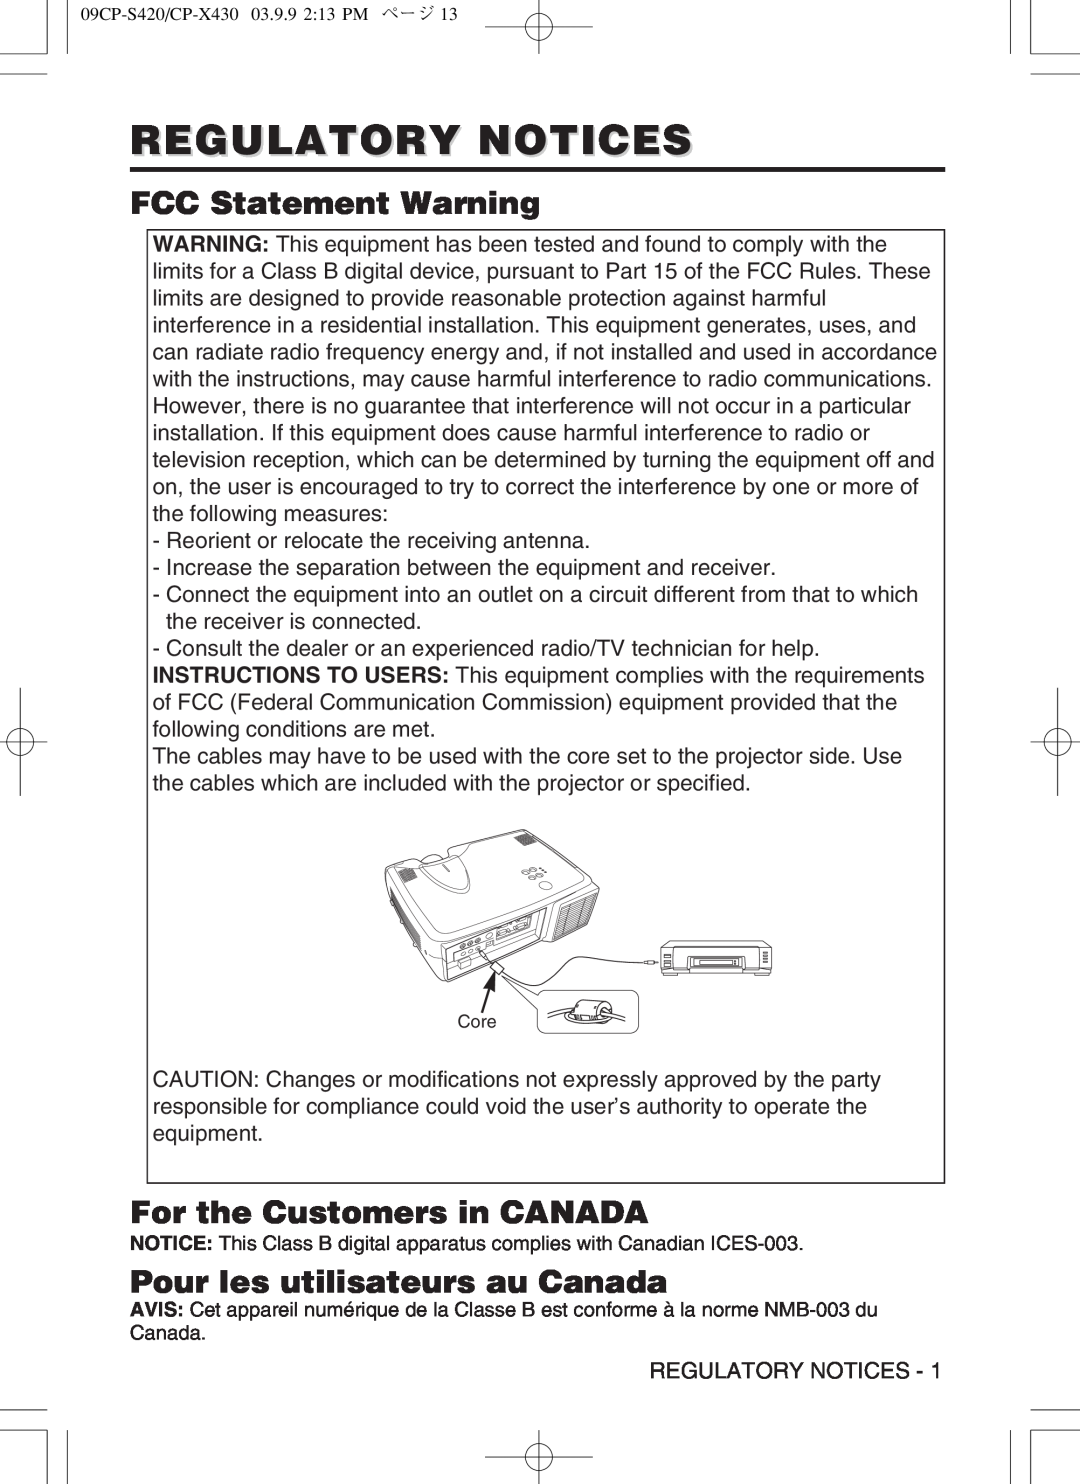 Hitachi CP-X430WA Regulatory Notices, FCC Statement Warning, For the Customers in CANADA, Pour les utilisateurs au Canada 